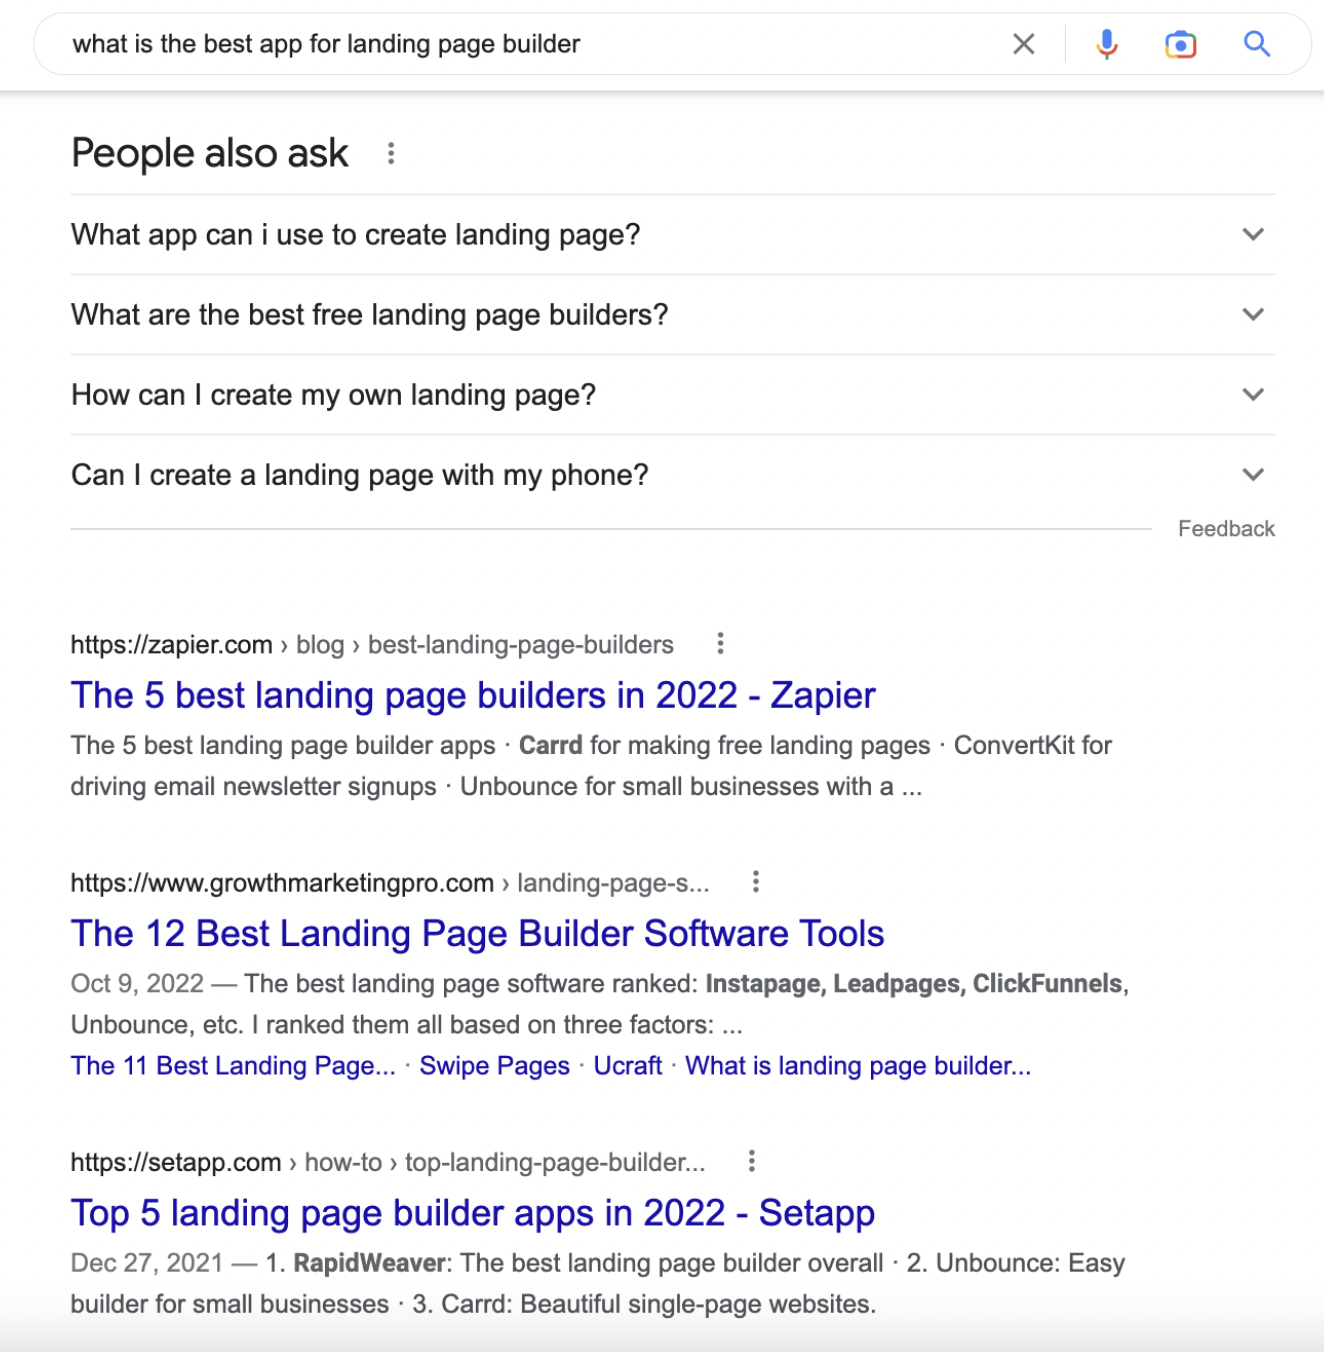 Organic results for the same search